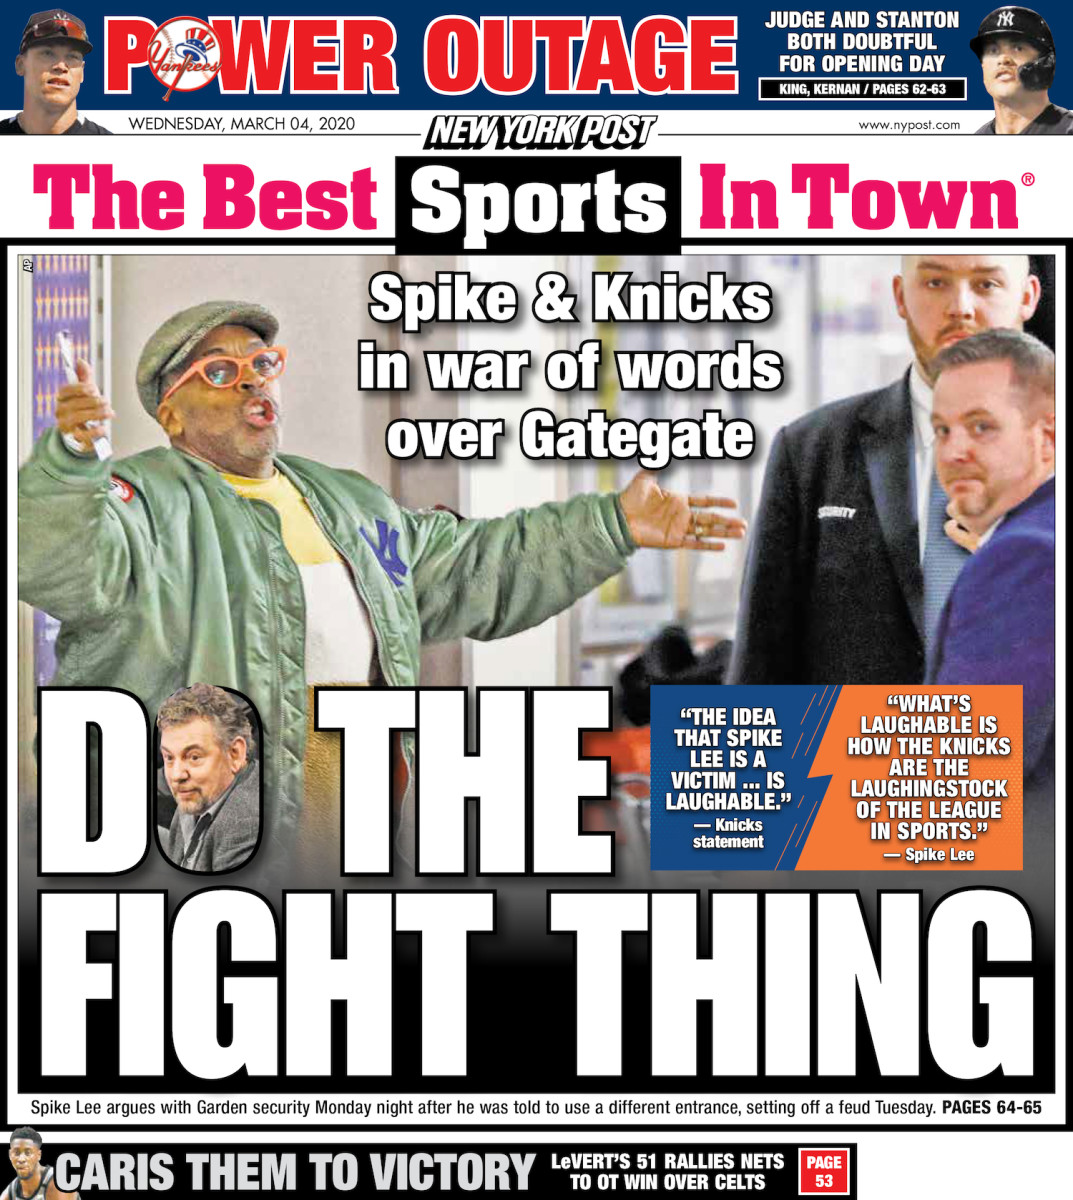 The back page of the New York Post, featuring the Spike Lee "Do the Fight Thing" headline